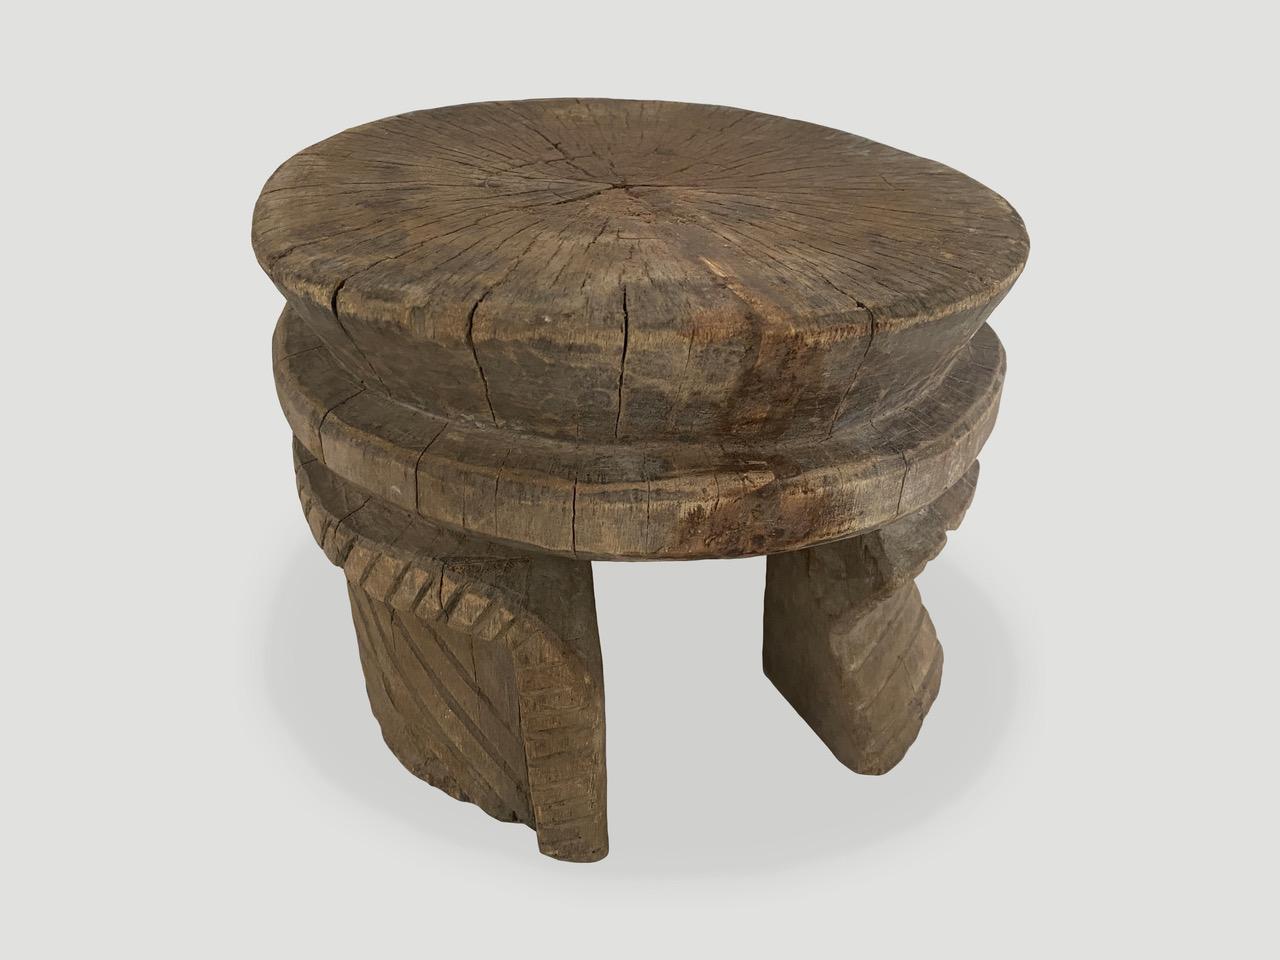 Wood Andrianna Shamaris Antique Hand Carved African Side Table or Stool For Sale